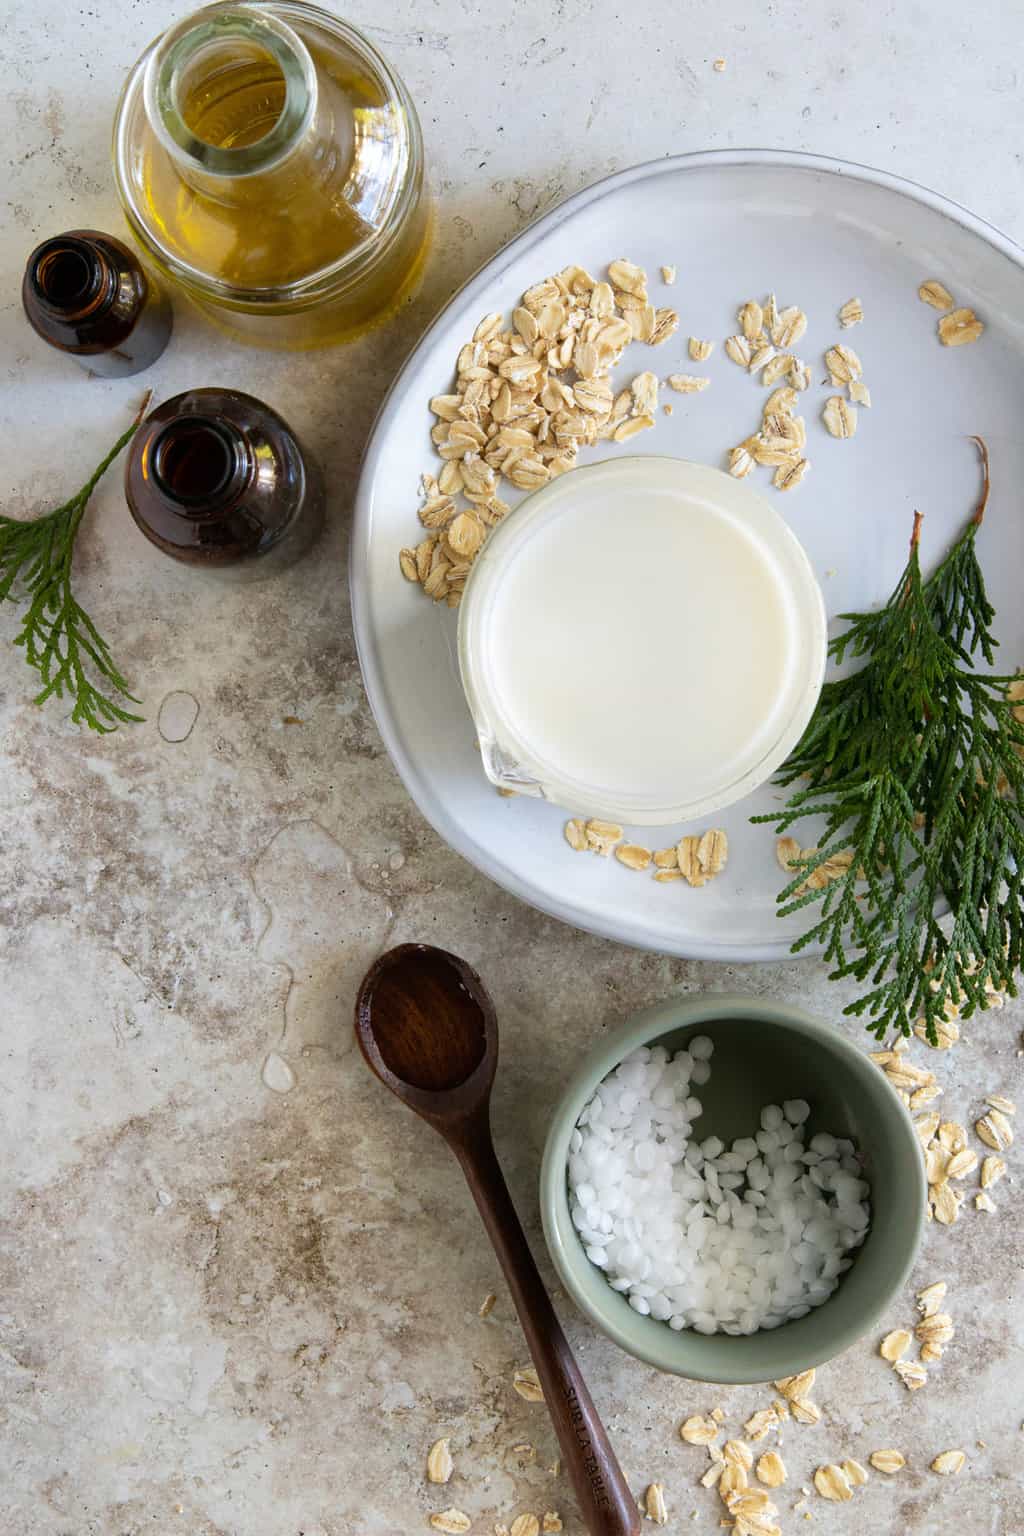 Ingredients for Oat Milk Lotion